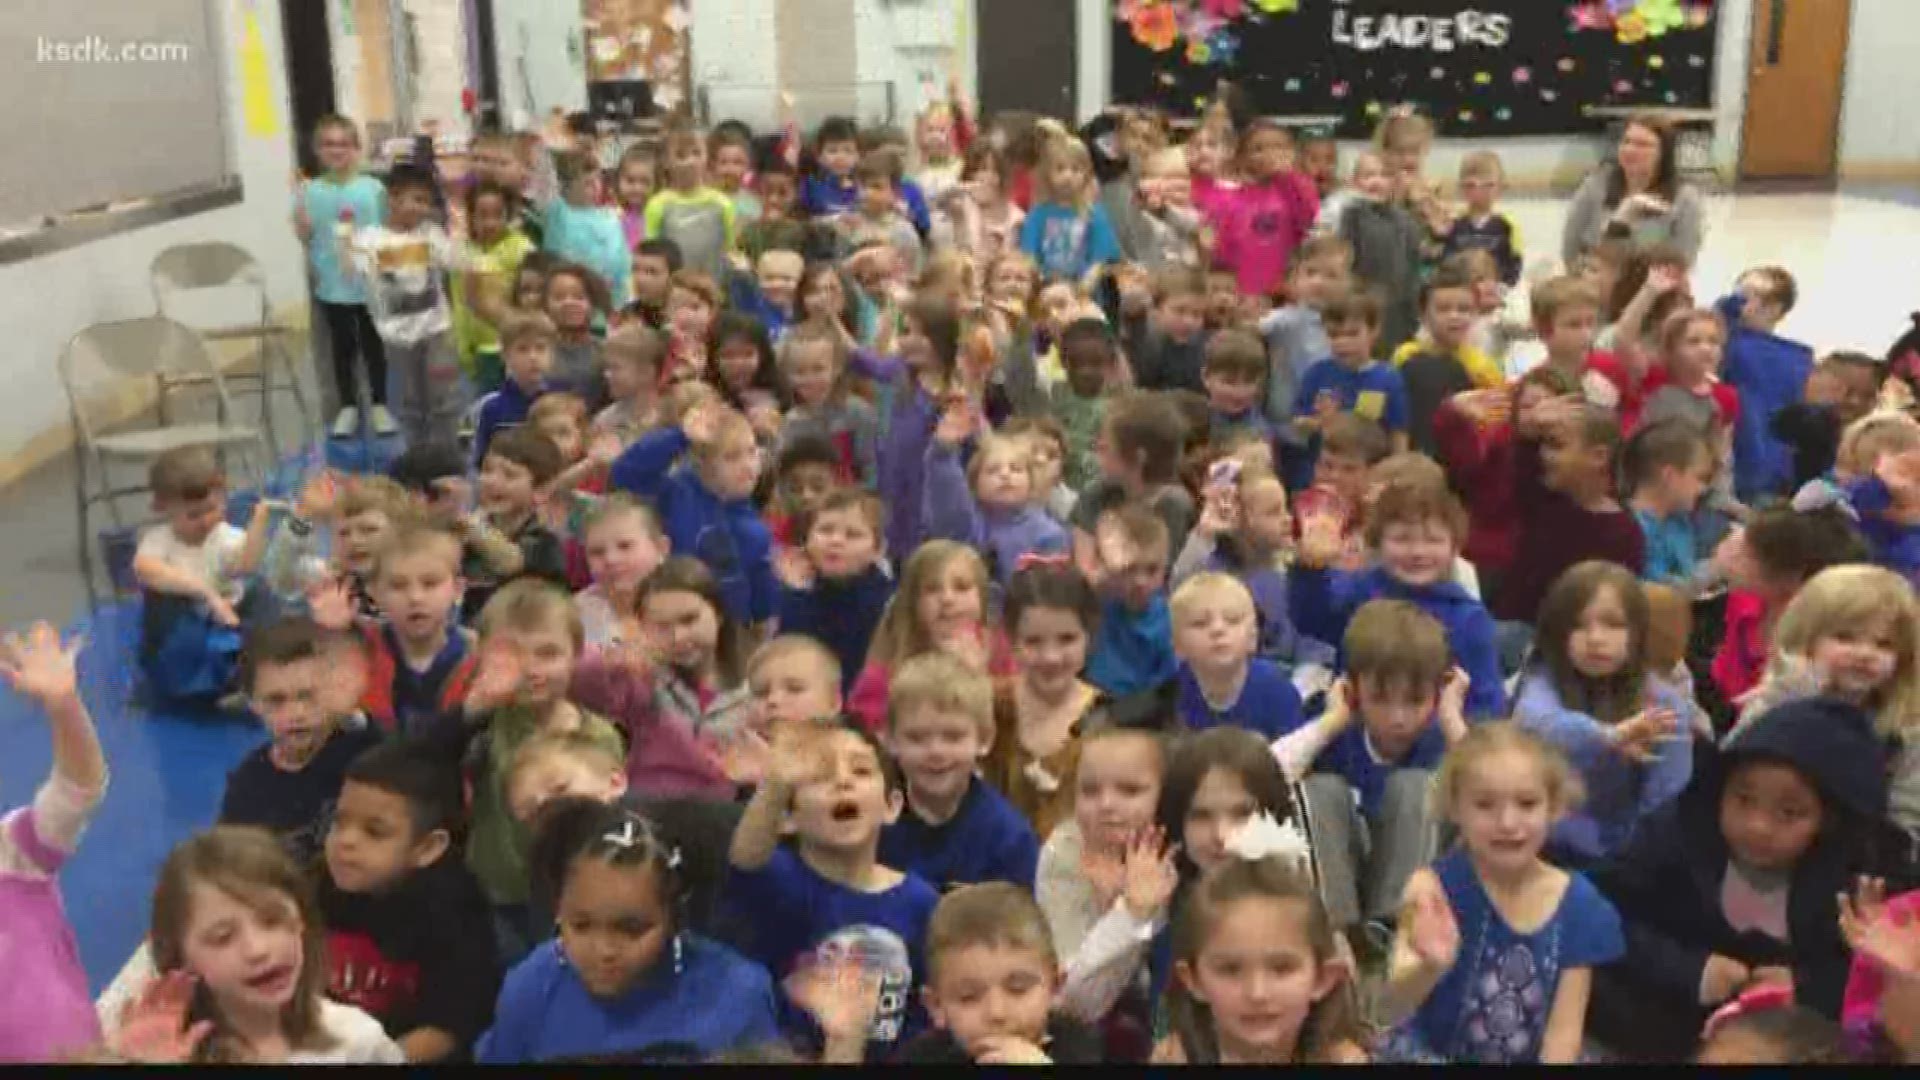 5 On Your Side spoke to students at Joseph L. Mudd Elementary School about weather.